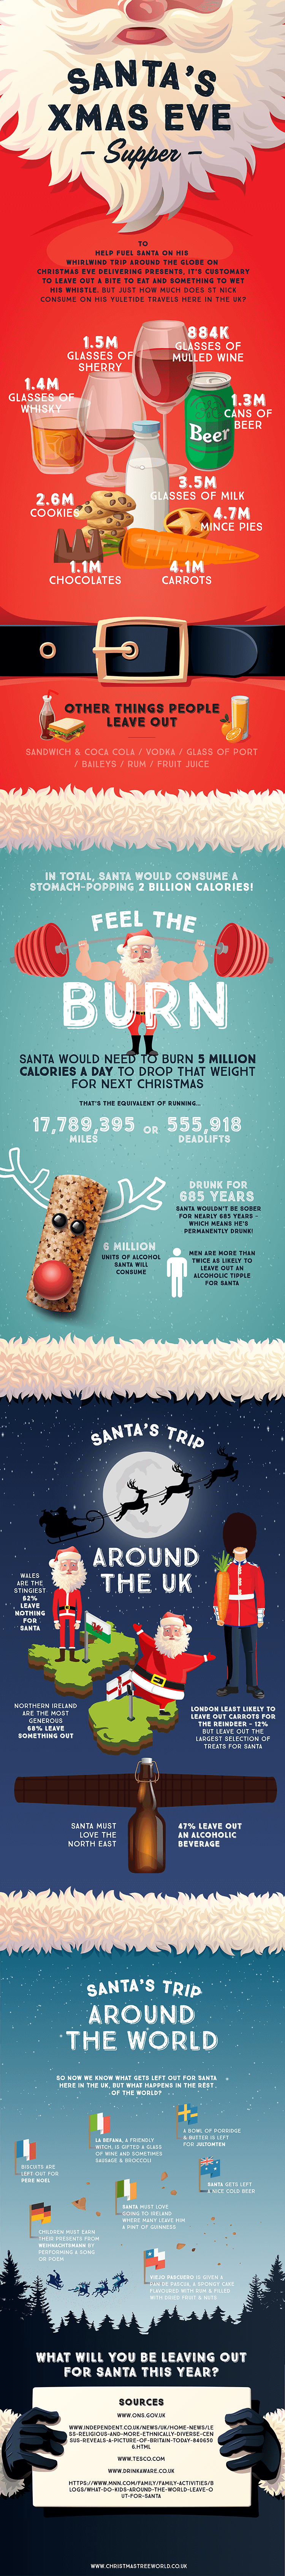 How much Santa eats on Christmas Eve infographic